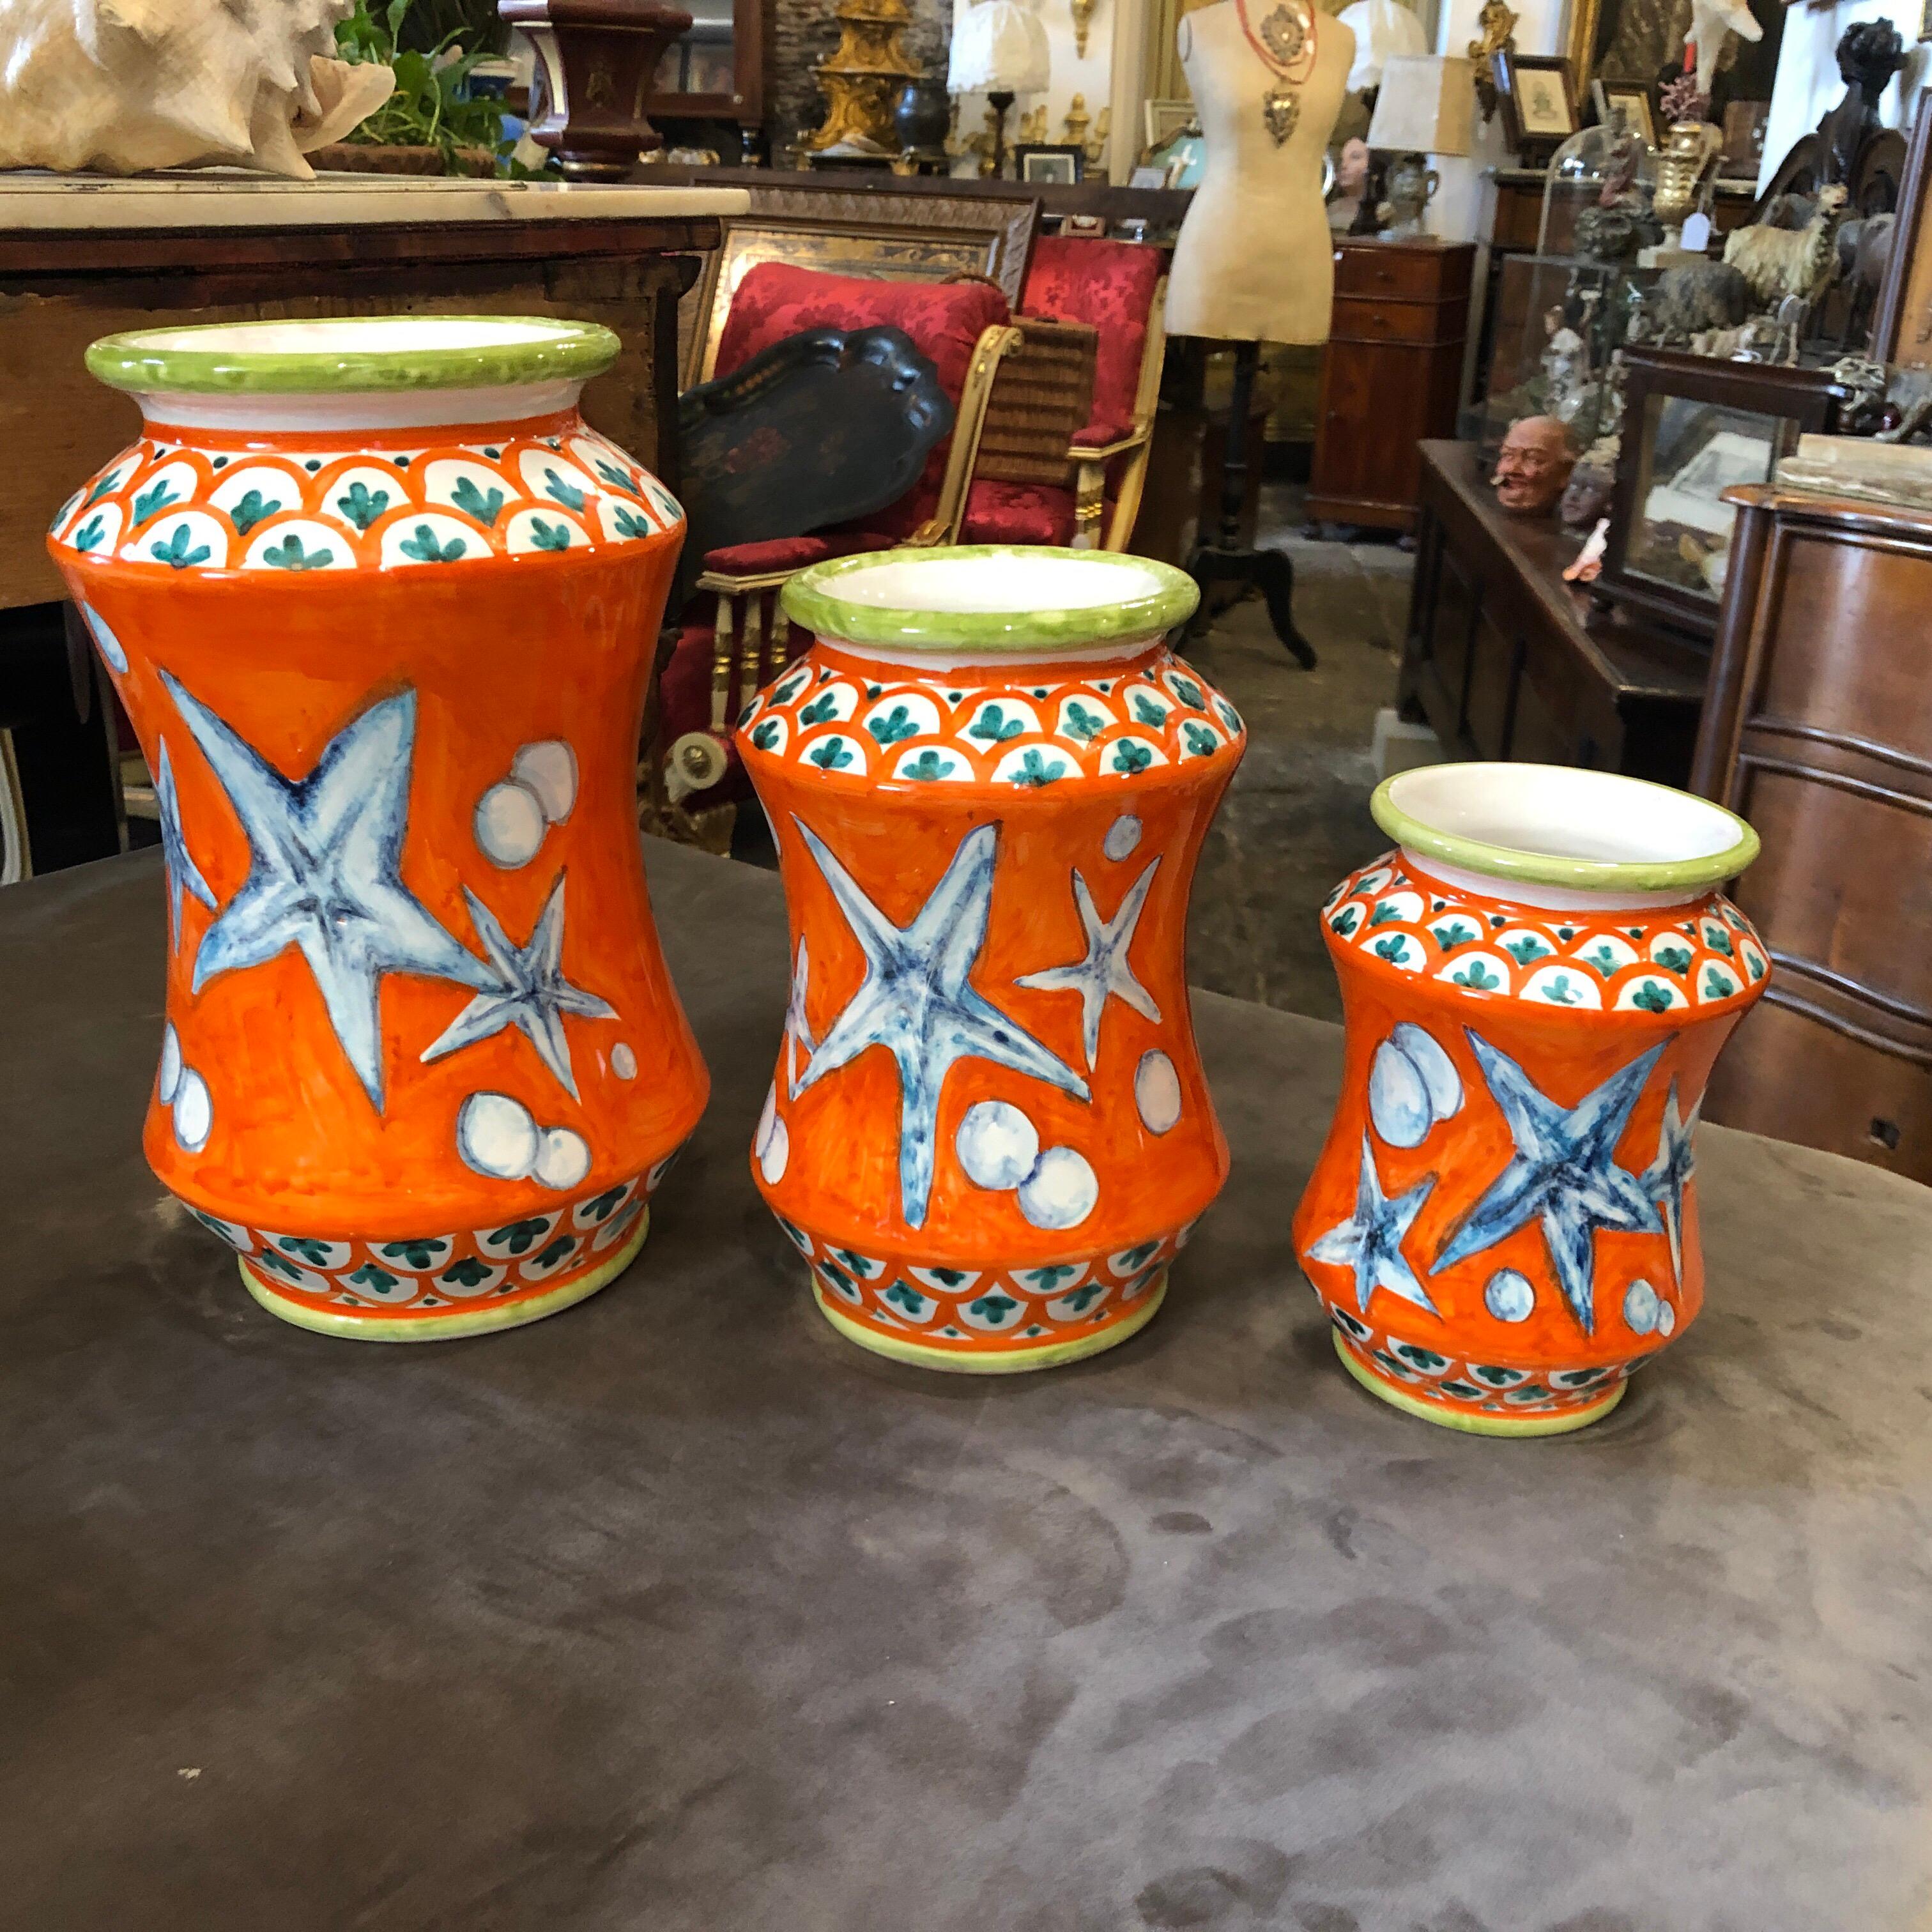 Three traditional pharmacy vases totally handcrafted and painted with sea decor. They are unique pieces especially made for our shop.